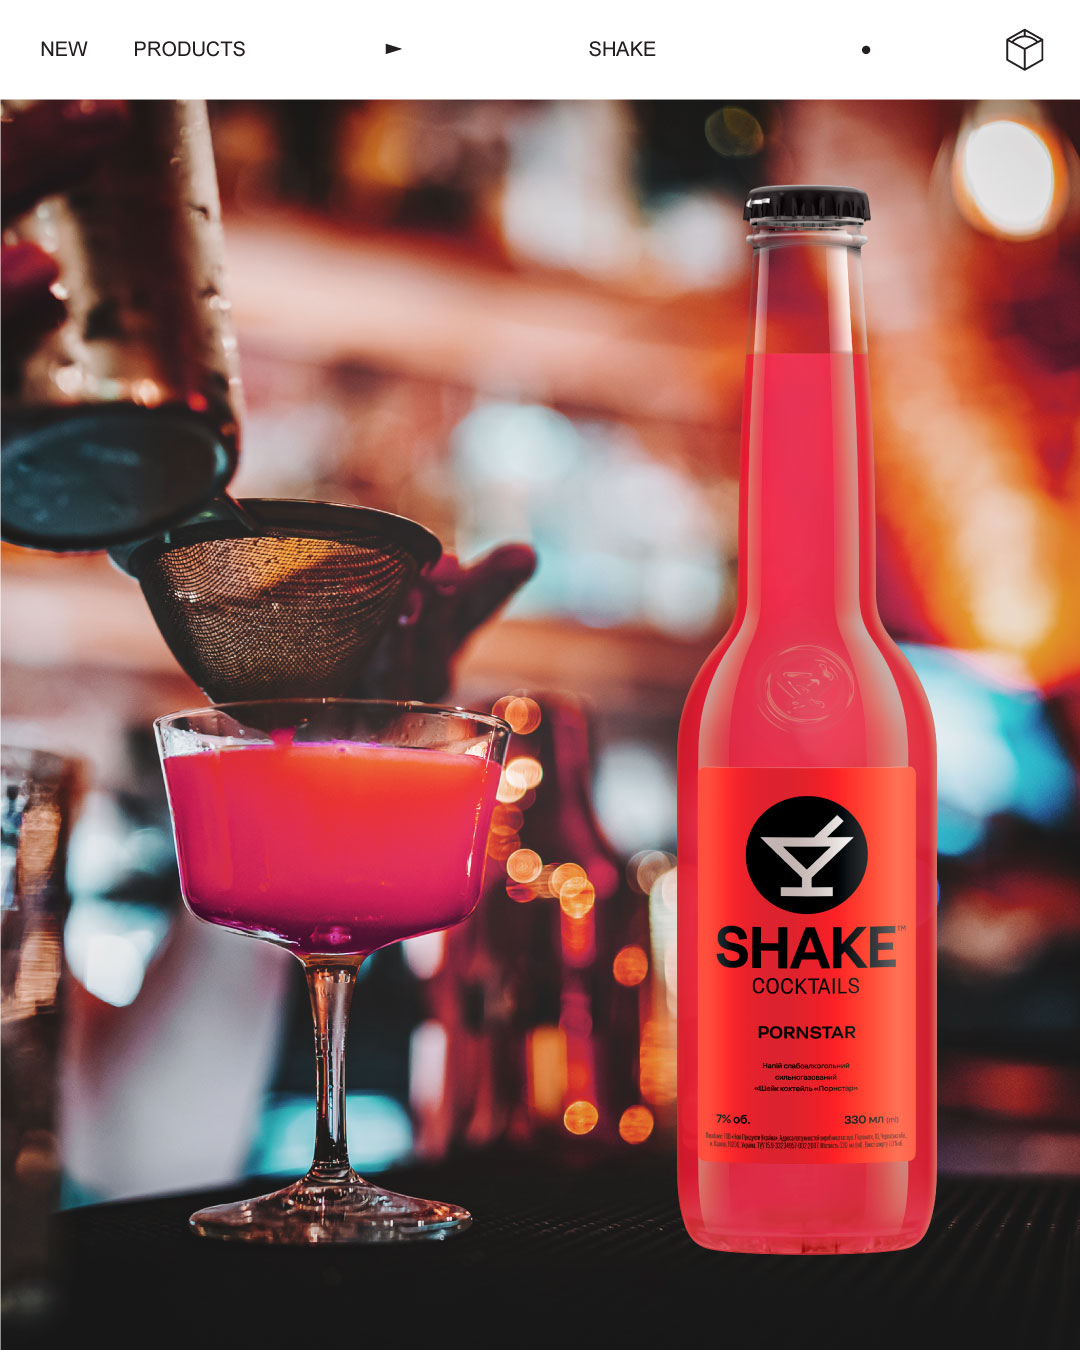 Our New Innovative and Tempting Drink: SHAKE Pornstar Breaking Down All Barriers